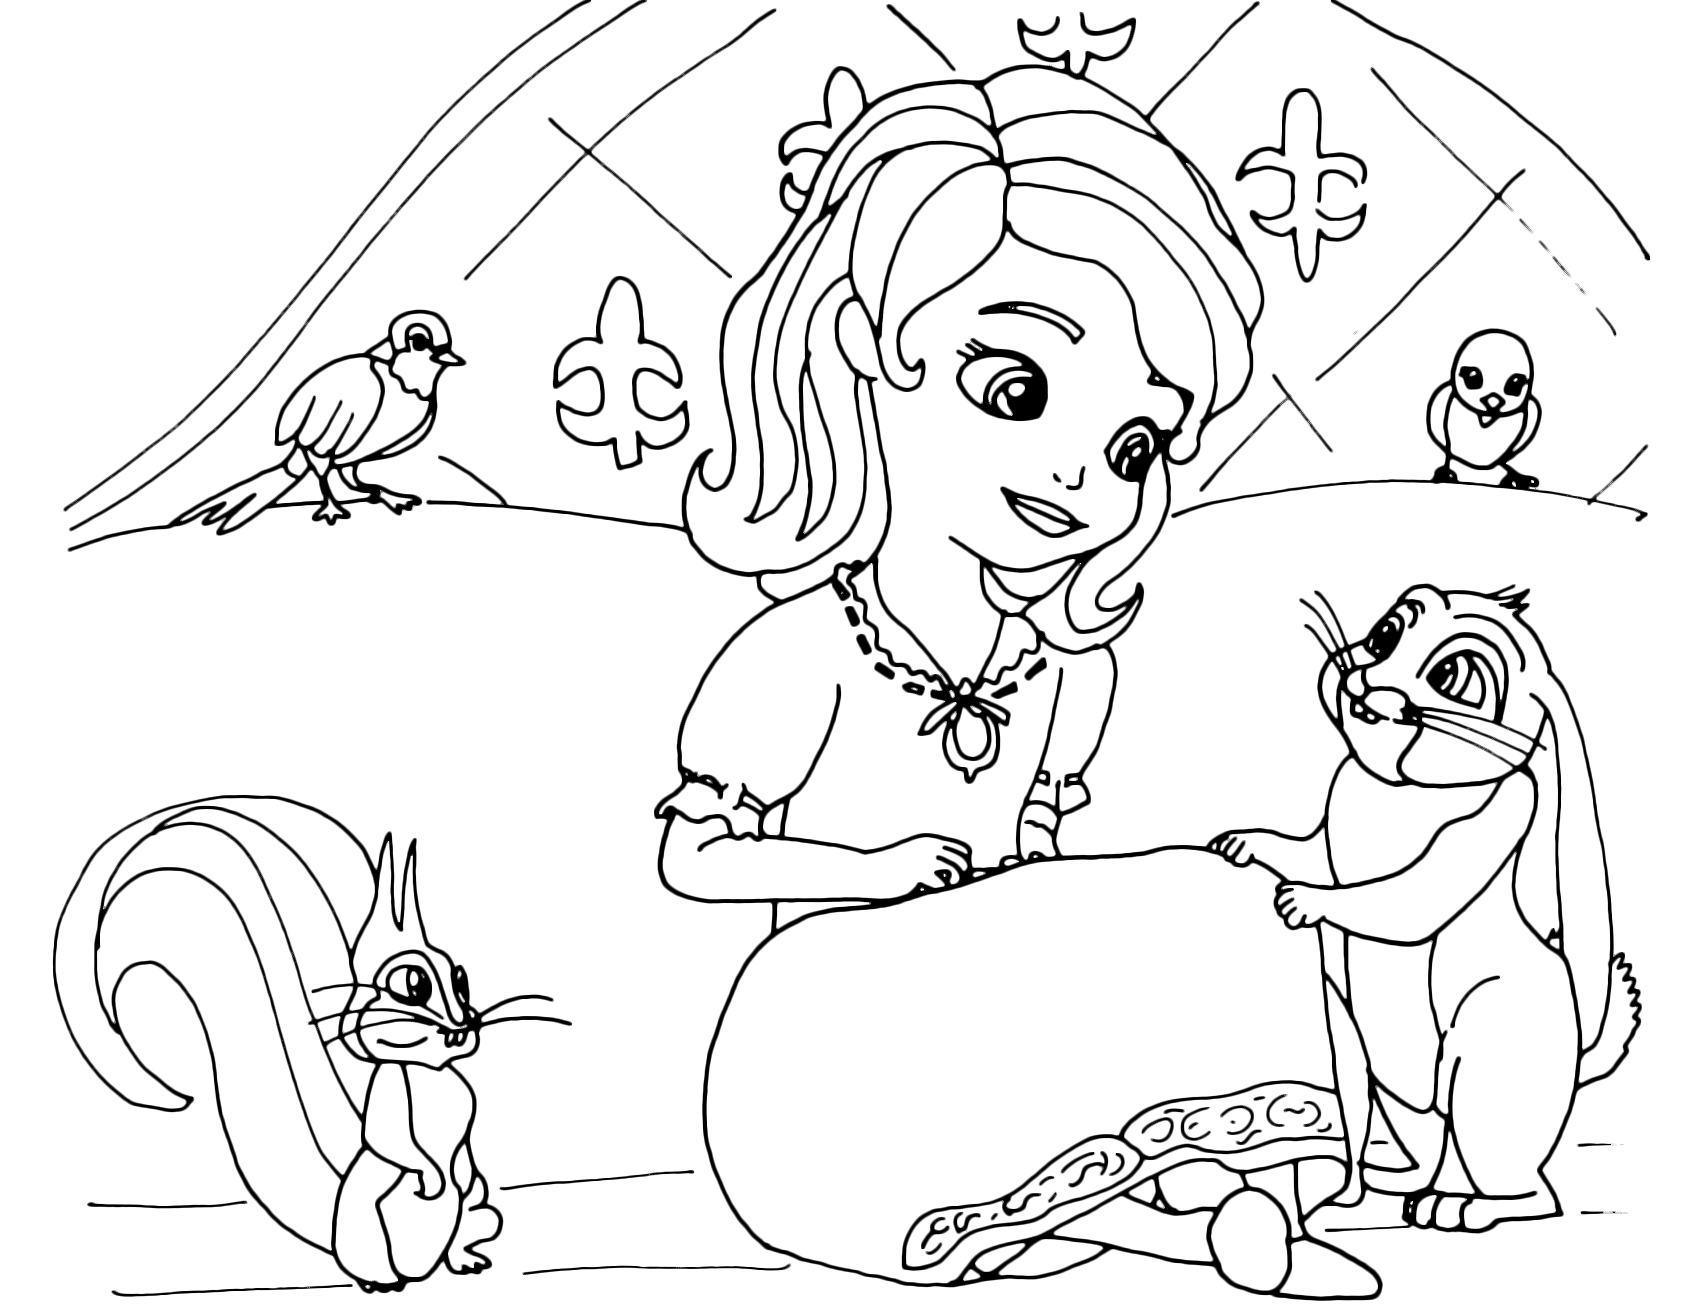 Sofia the First - Sofia listens to Clover and all her animal friends